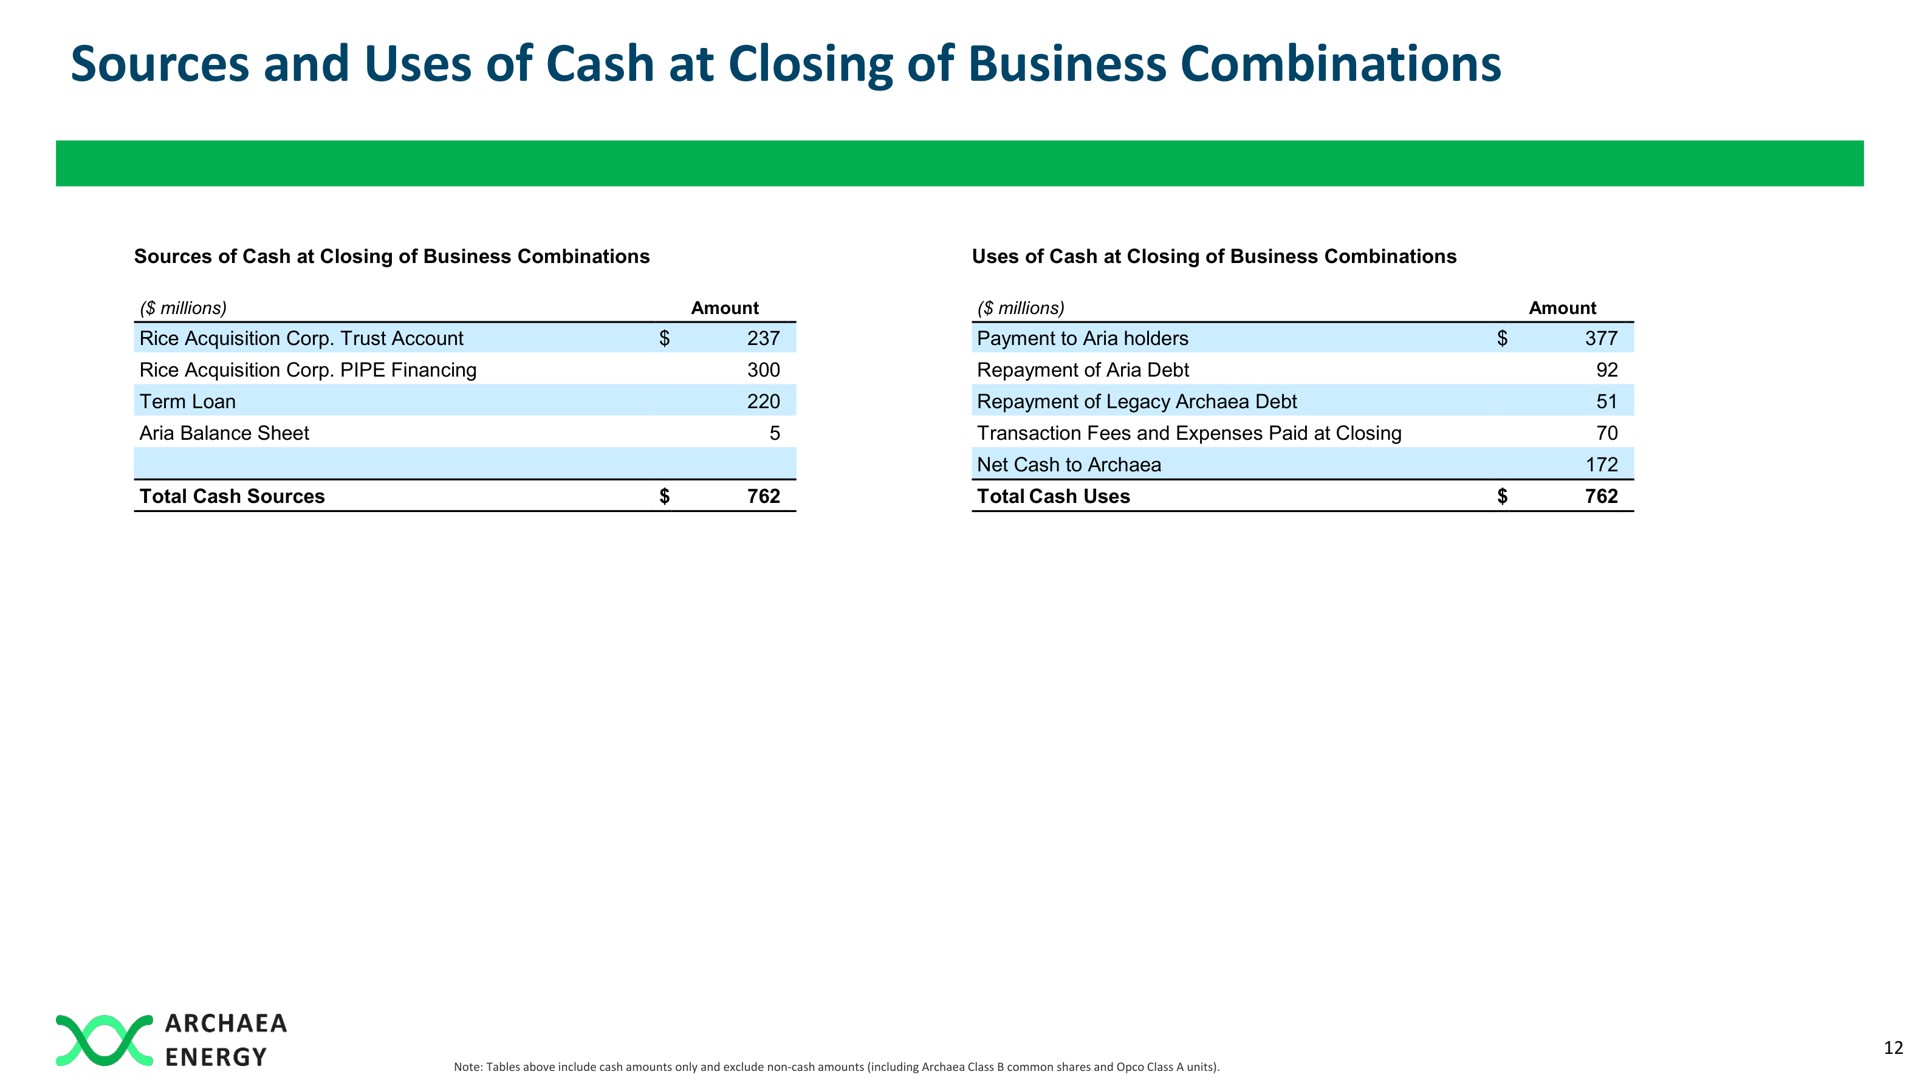 sources and uses of cash at closing of business combinations | Archaea Energy